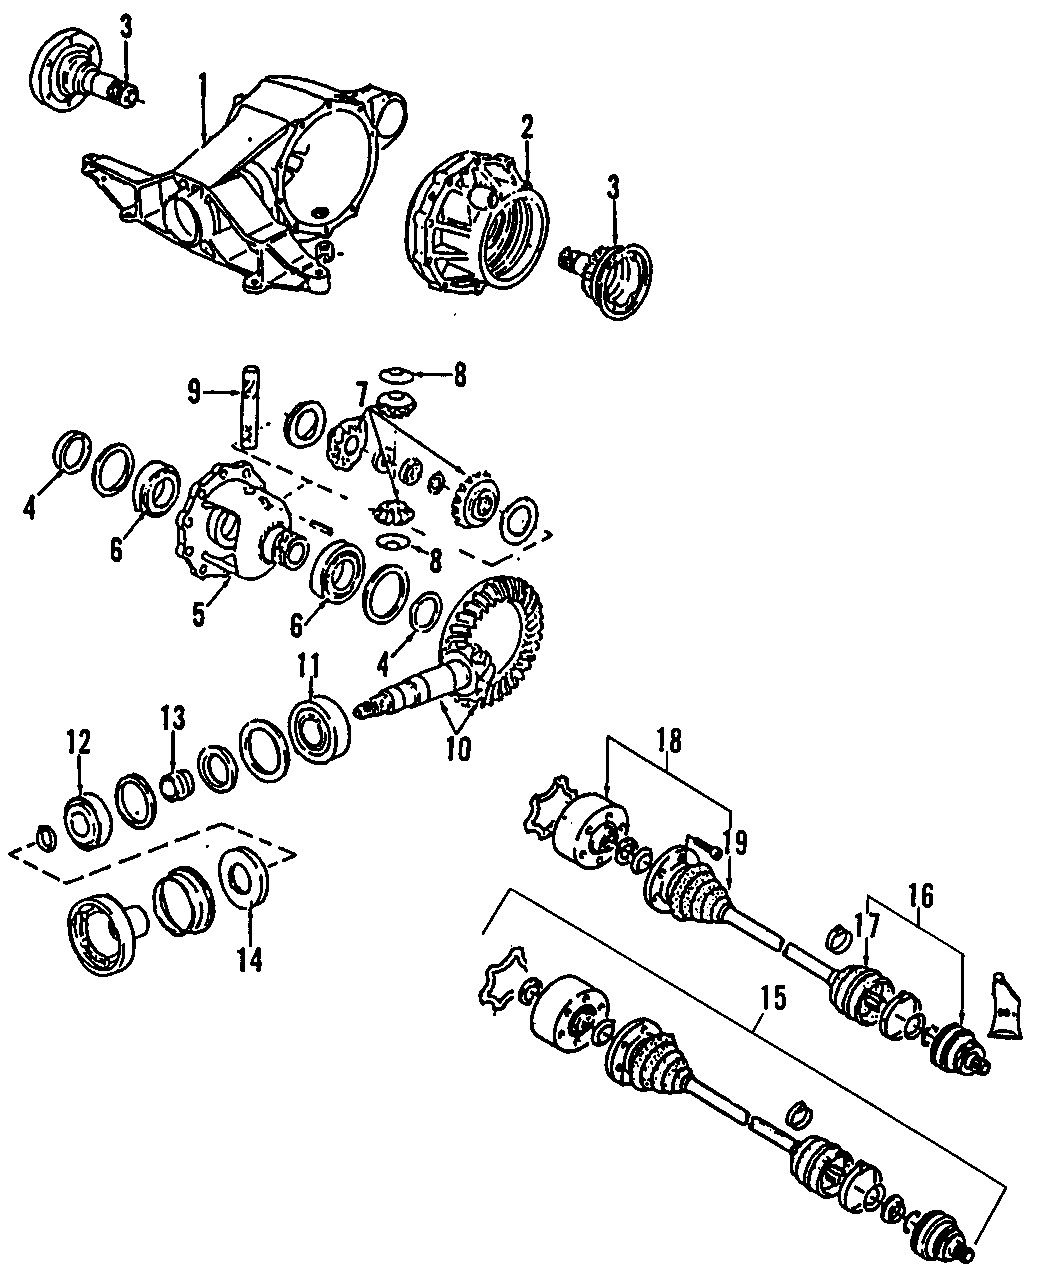 19DRIVE AXLES. REAR AXLE. AXLE SHAFTS & JOINTS. DIFFERENTIAL. PROPELLER SHAFT.https://images.simplepart.com/images/parts/motor/fullsize/F205080.png